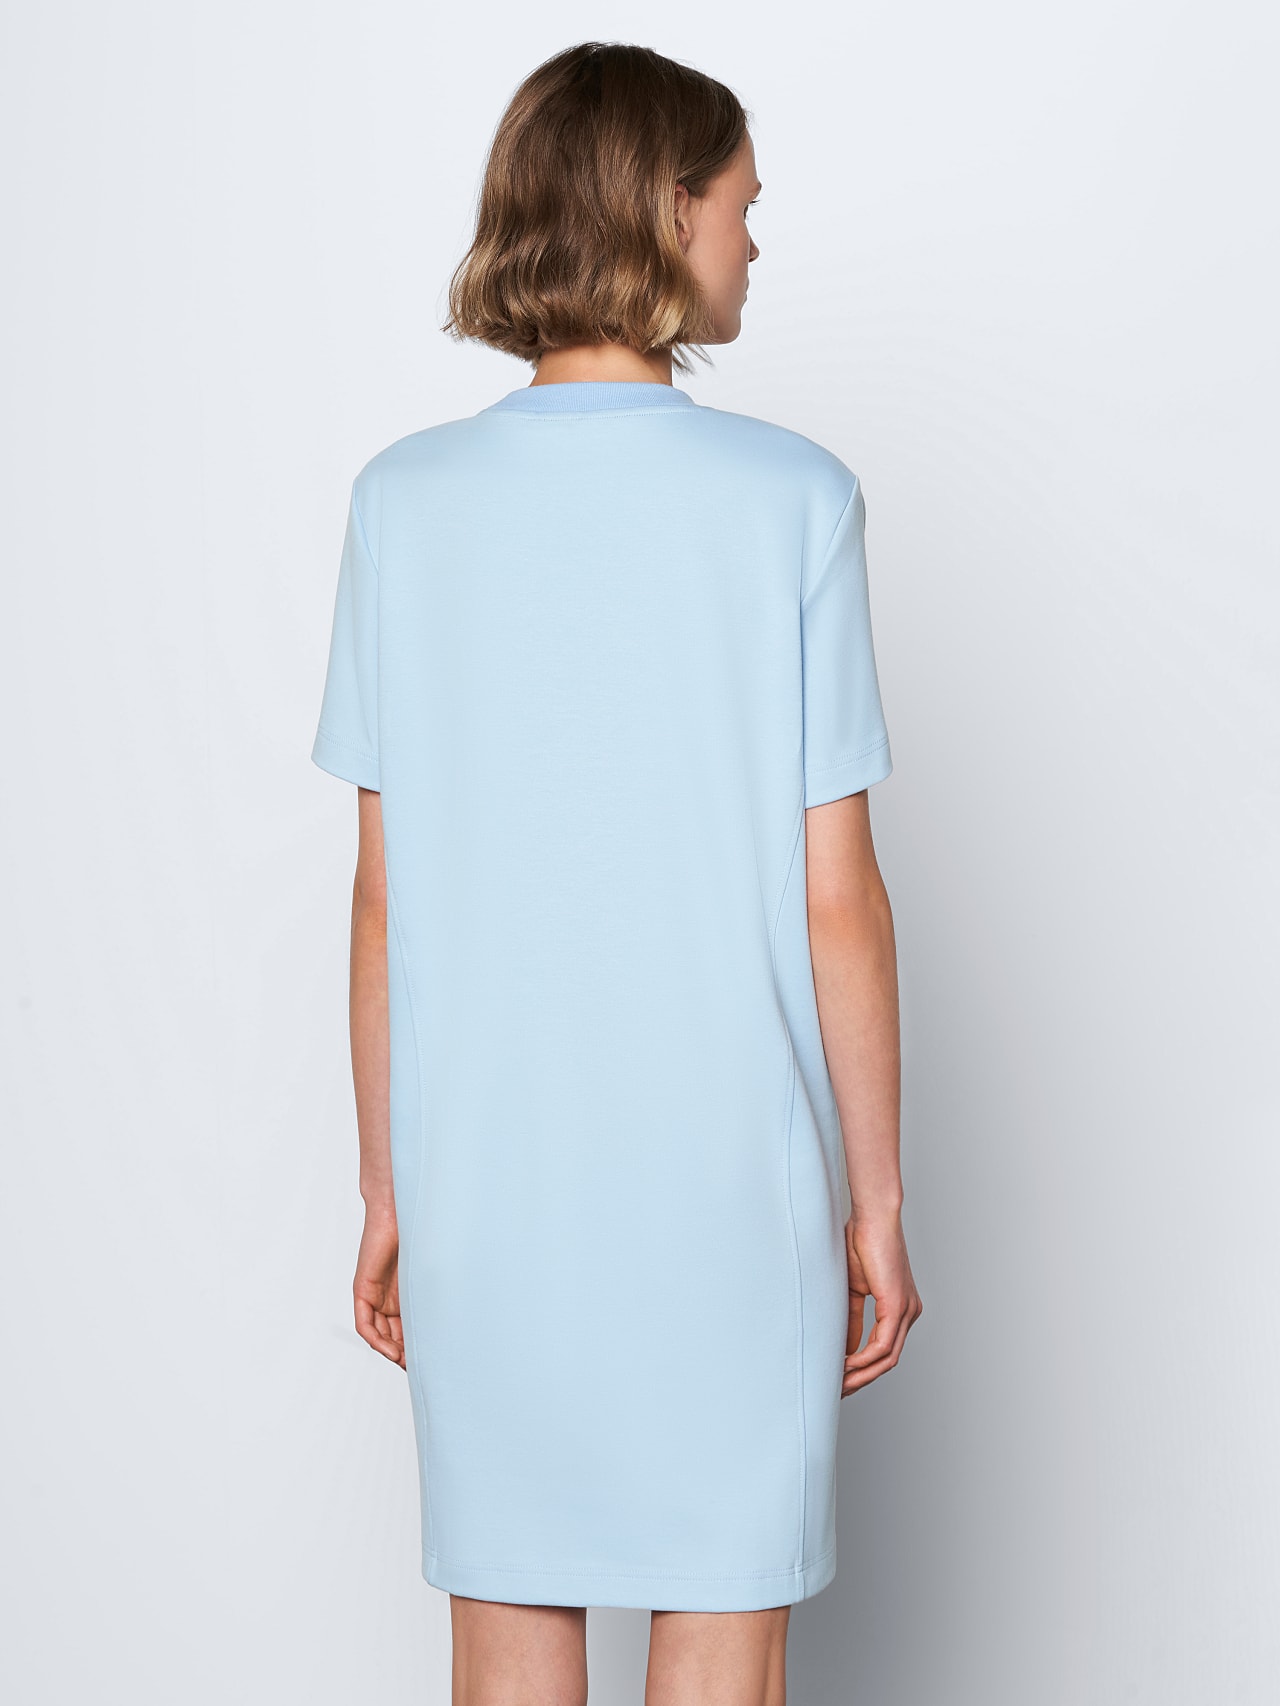 AlphaTauri | STAKU V1.Y6.01 | Sweat Dress with Logo Embroidery in light blue for Women